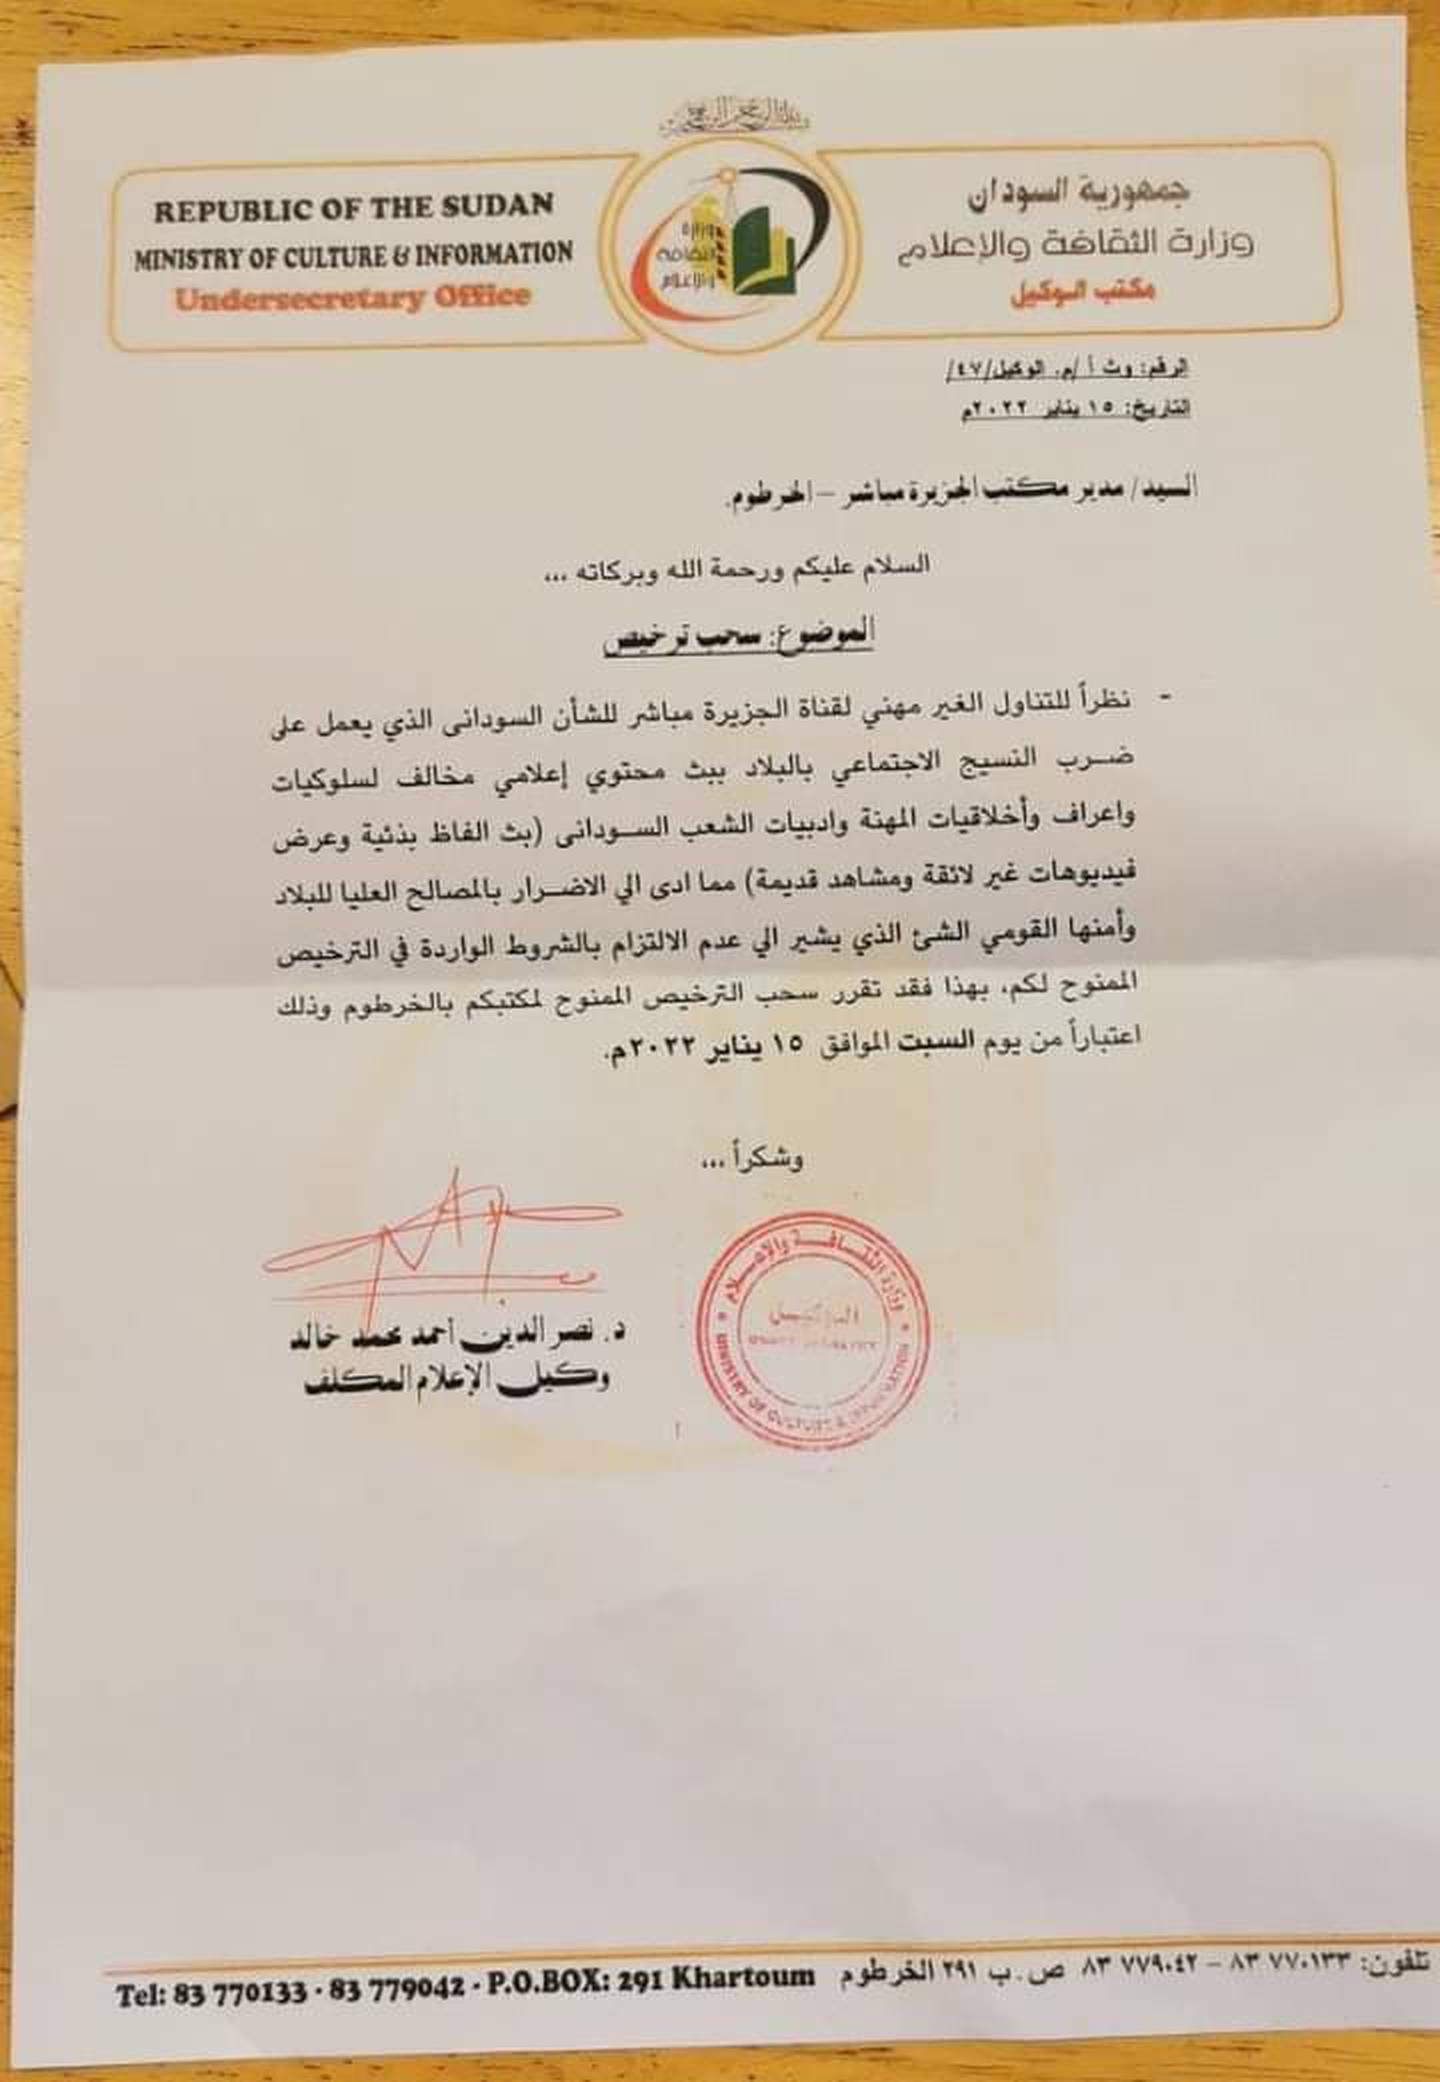 A copy of the Sudanese Information Ministry's letter ordering the closure of the Khartoum office of Al Jazeera Direct.